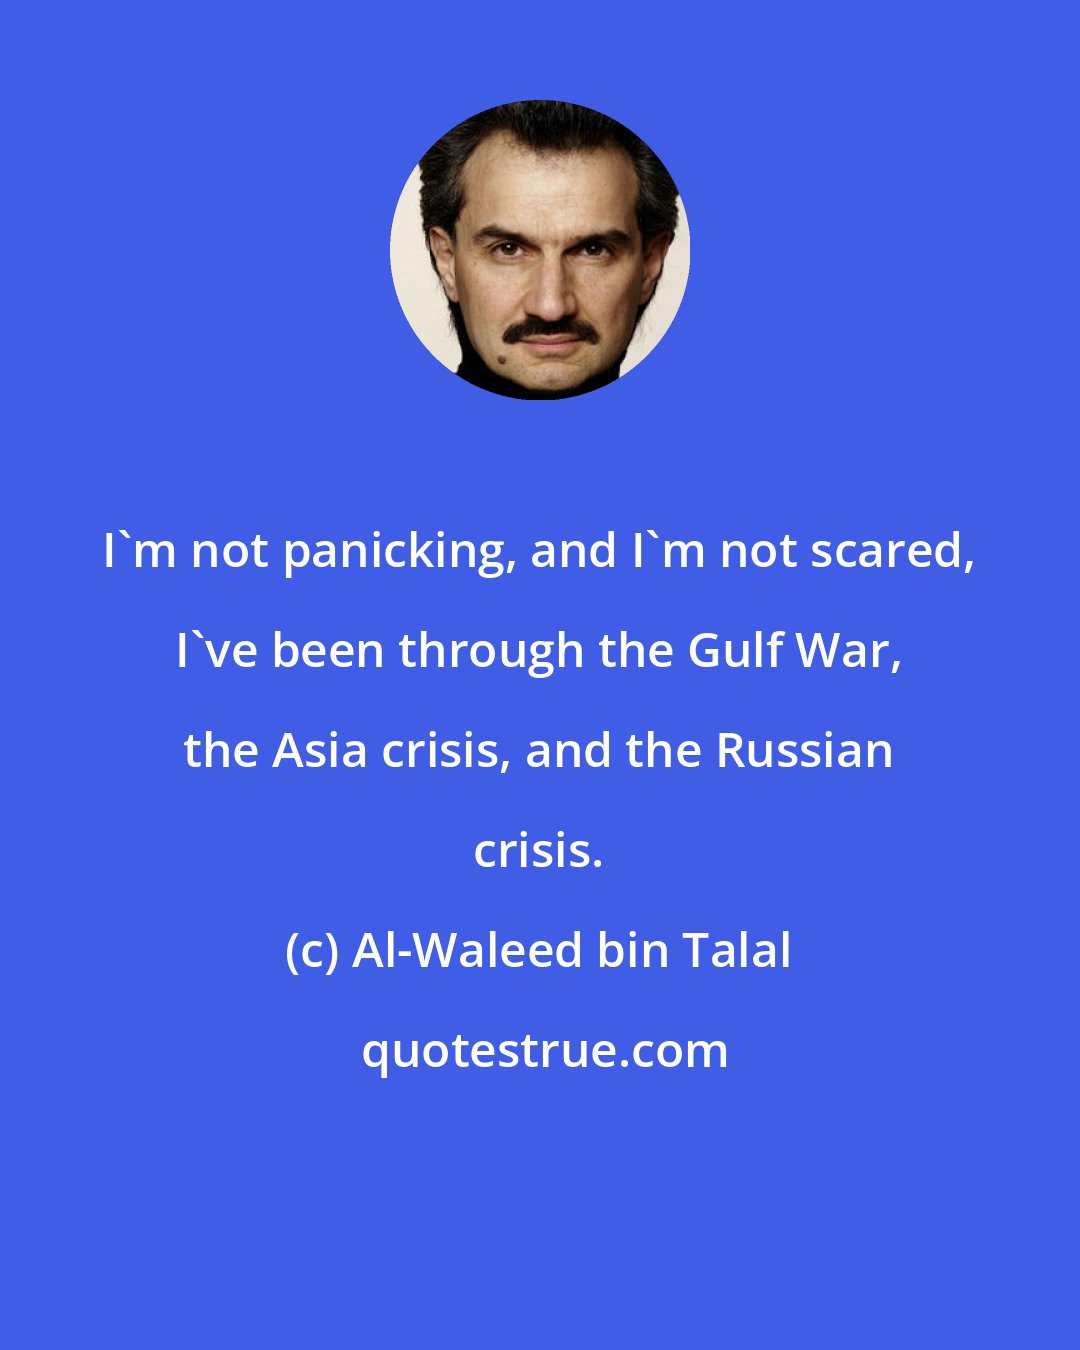 Al-Waleed bin Talal: I'm not panicking, and I'm not scared, I've been through the Gulf War, the Asia crisis, and the Russian crisis.